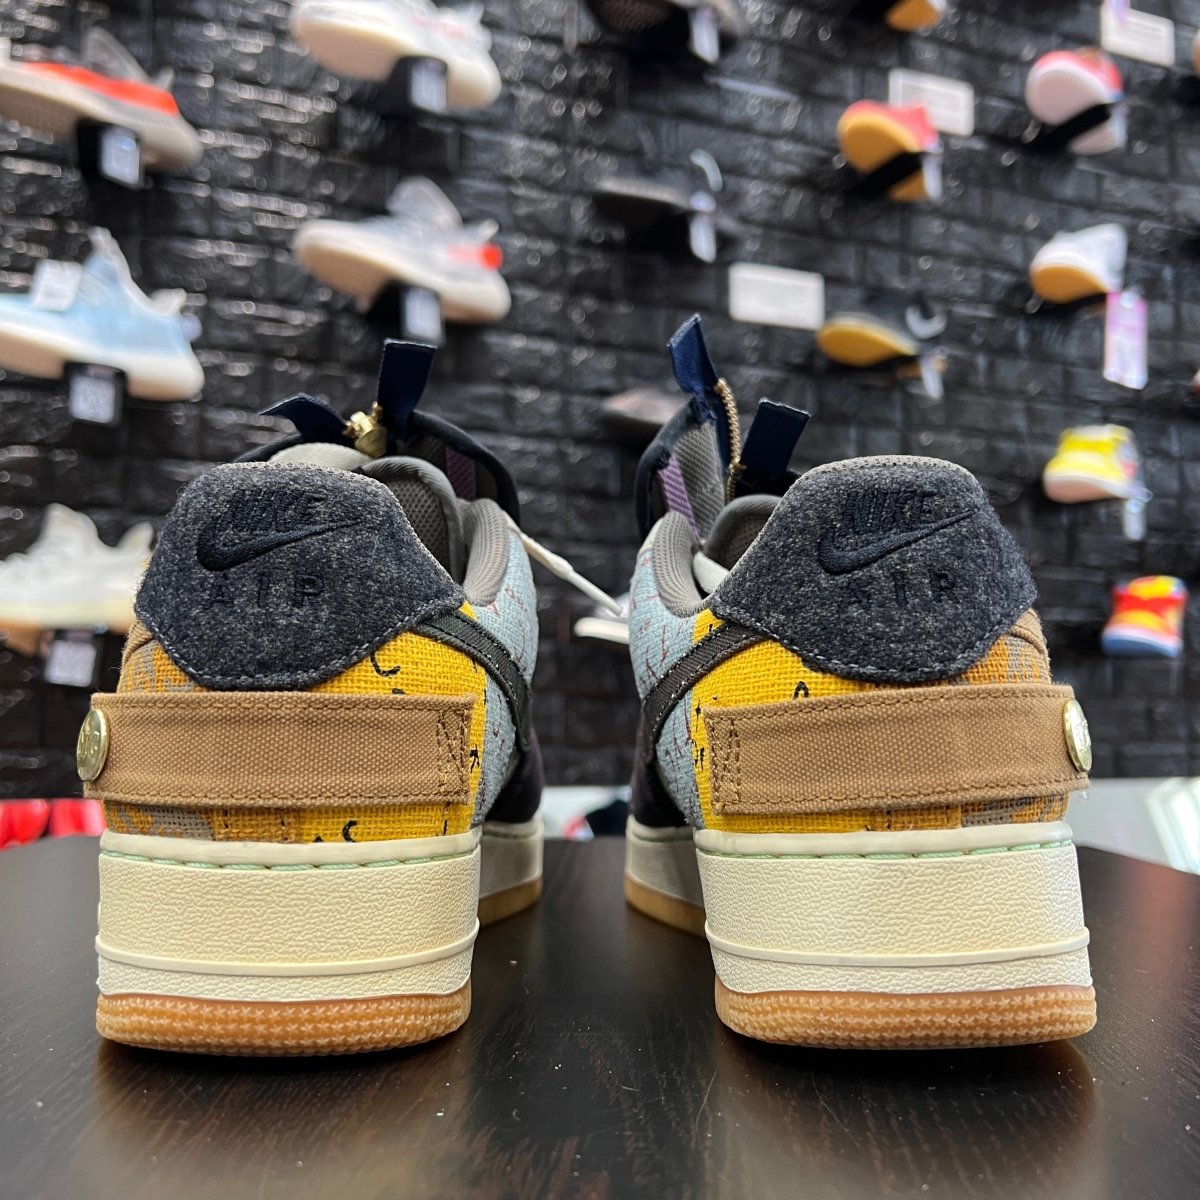 Travis Scott x Nike Air Force 1 Low Cactus Jack: Review & On